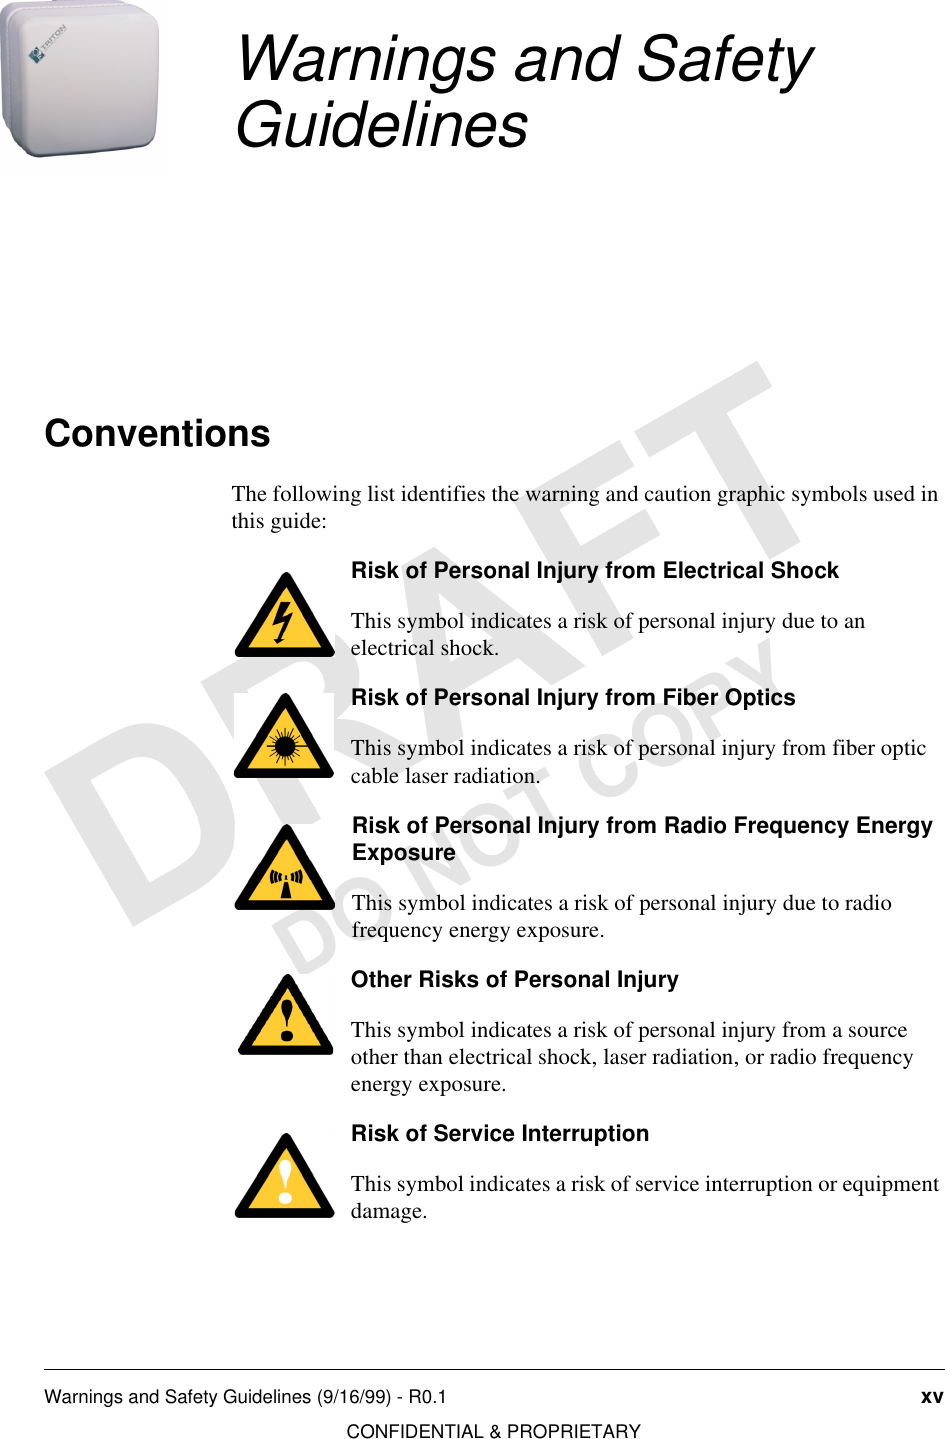 Warnings and Safety Guidelines (9/16/99) - R0.1 xvCONFIDENTIAL &amp; PROPRIETARYDO NOT COPYWarnings and Safety GuidelinesConventionsThe following list identifies the warning and caution graphic symbols used in this guide:Risk of Personal Injury from Electrical ShockThis symbol indicates a risk of personal injury due to an electrical shock.Risk of Personal Injury from Fiber OpticsThis symbol indicates a risk of personal injury from fiber optic cable laser radiation.Risk of Personal Injury from Radio Frequency Energy ExposureThis symbol indicates a risk of personal injury due to radio frequency energy exposure.Other Risks of Personal InjuryThis symbol indicates a risk of personal injury from a source other than electrical shock, laser radiation, or radio frequency energy exposure.Risk of Service InterruptionThis symbol indicates a risk of service interruption or equipment damage.